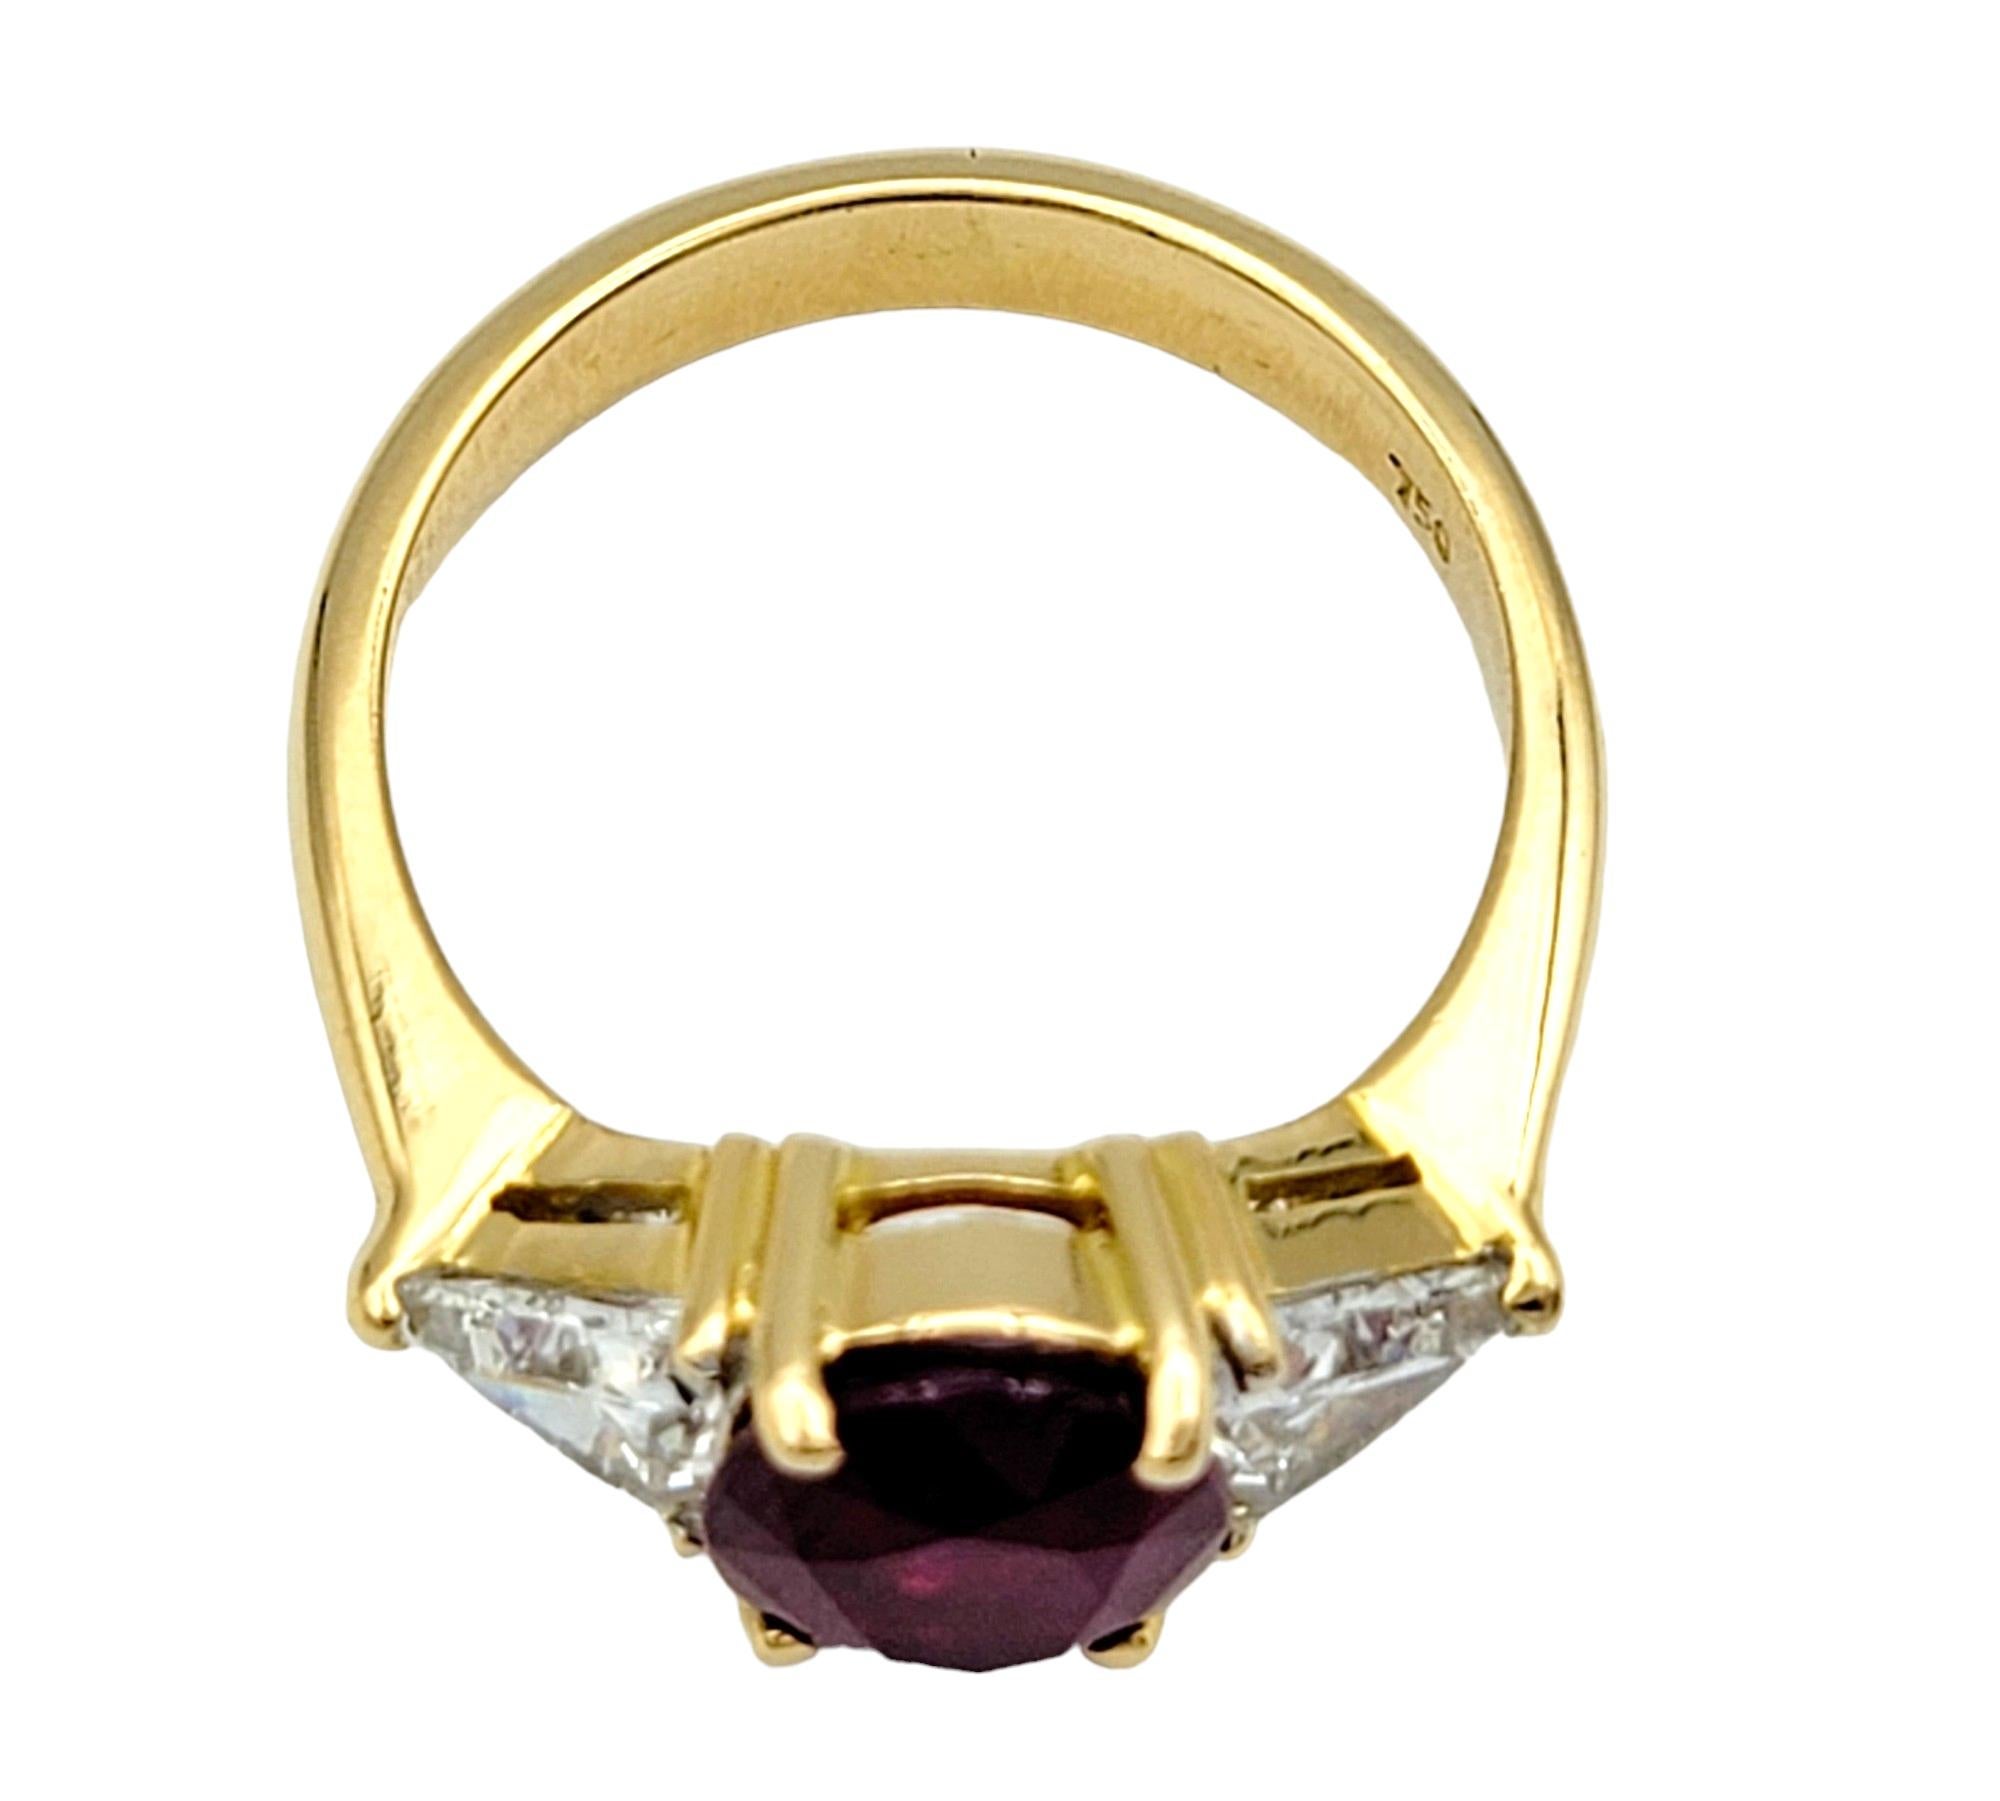 Rare Natural Oval Cut Burma Ruby and Trillion Diamond Ring 18 Karat Yellow Gold In Good Condition For Sale In Scottsdale, AZ